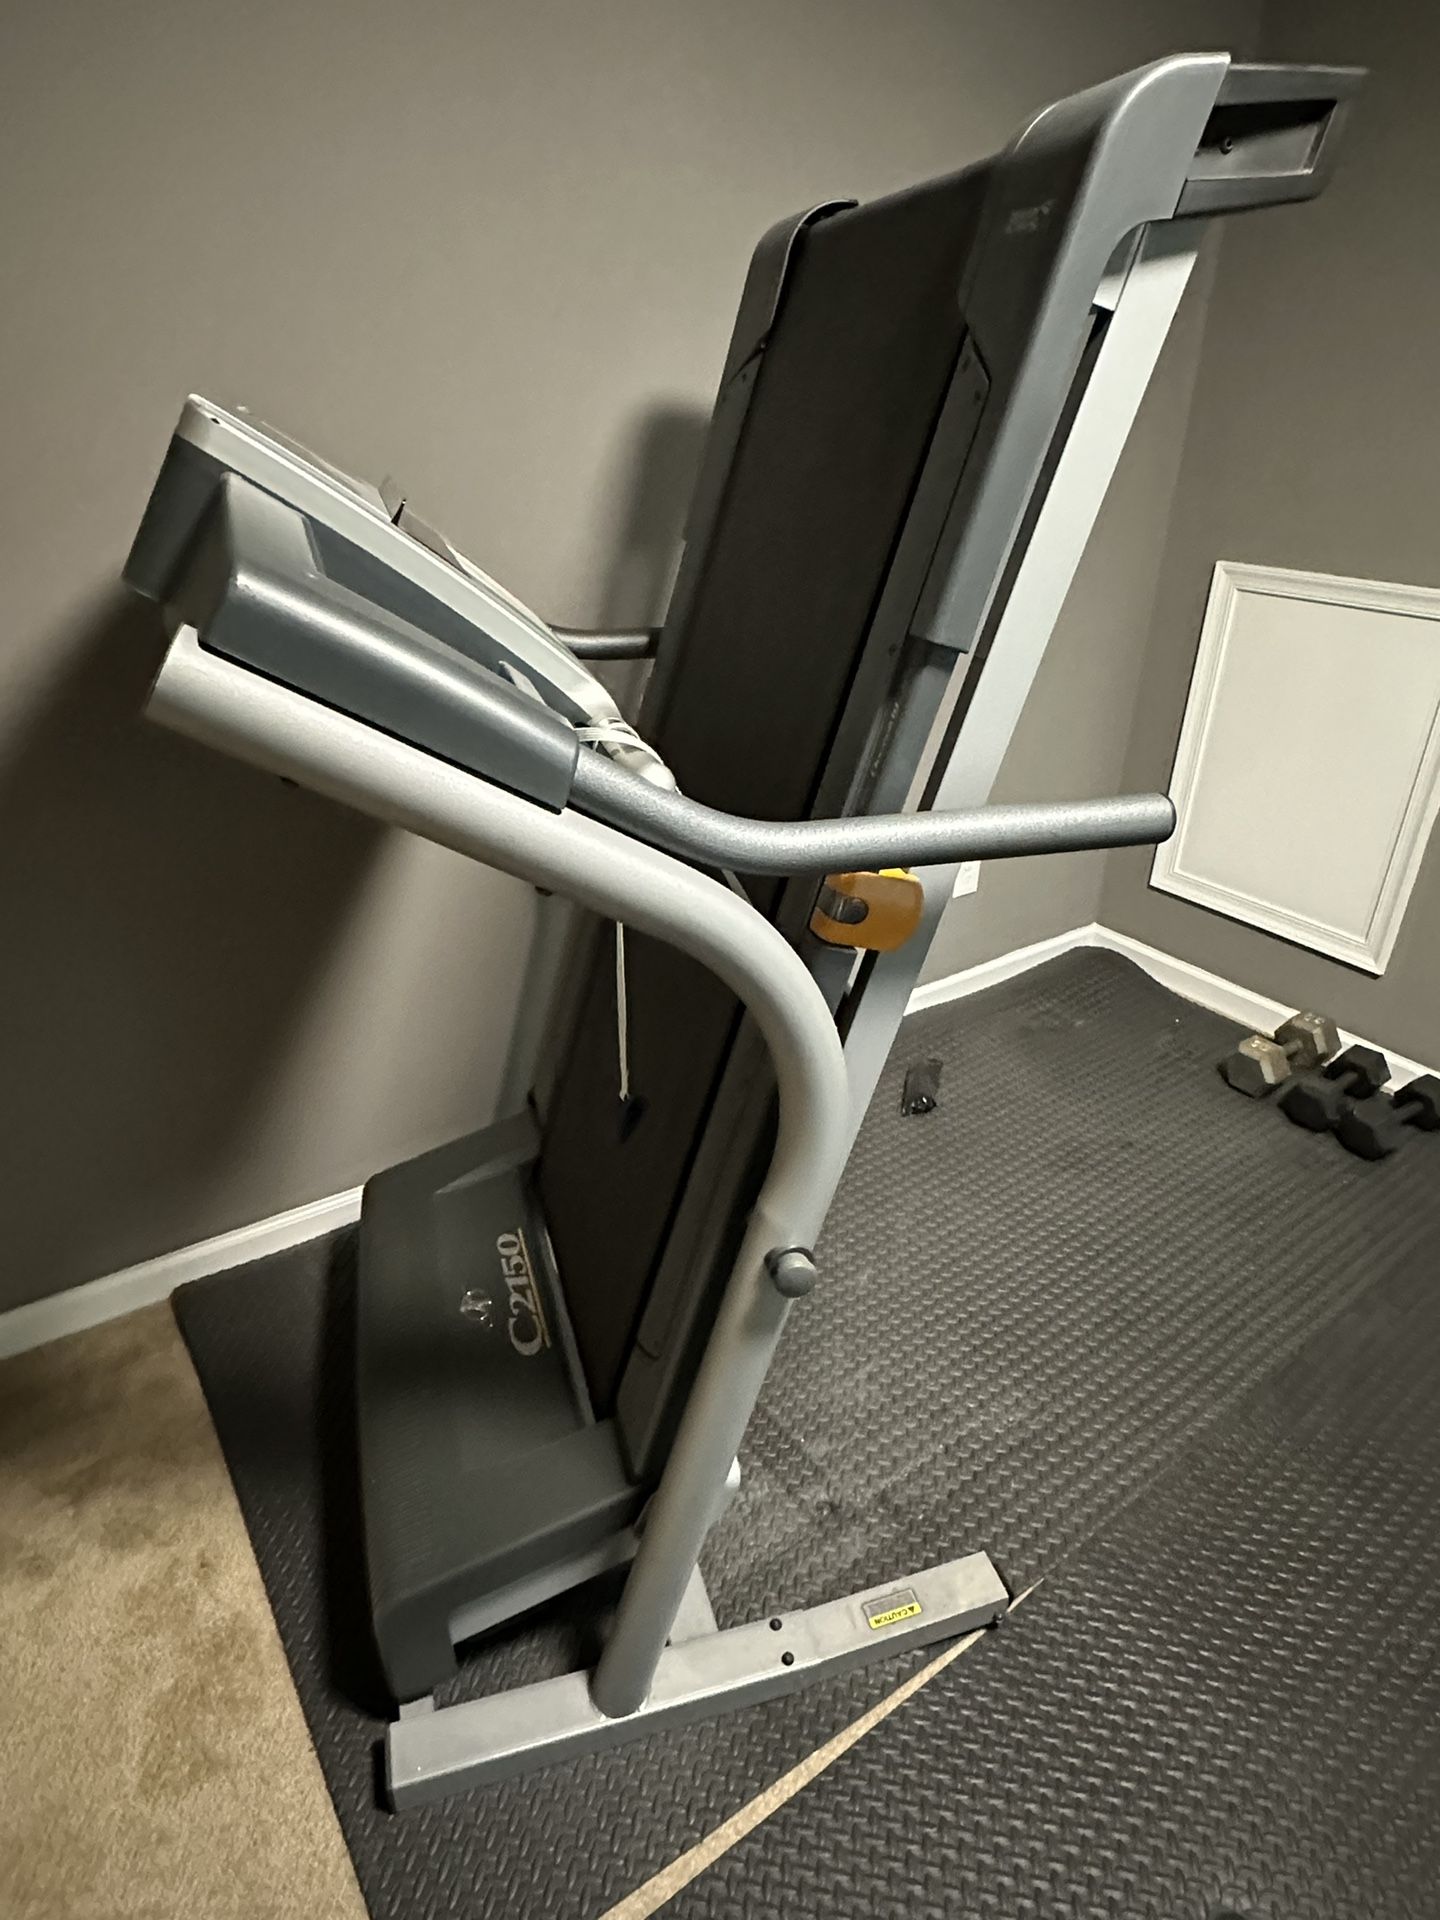 Nordictrack C2150 Treadmill - It Works - It’s $99 Pick up Today 